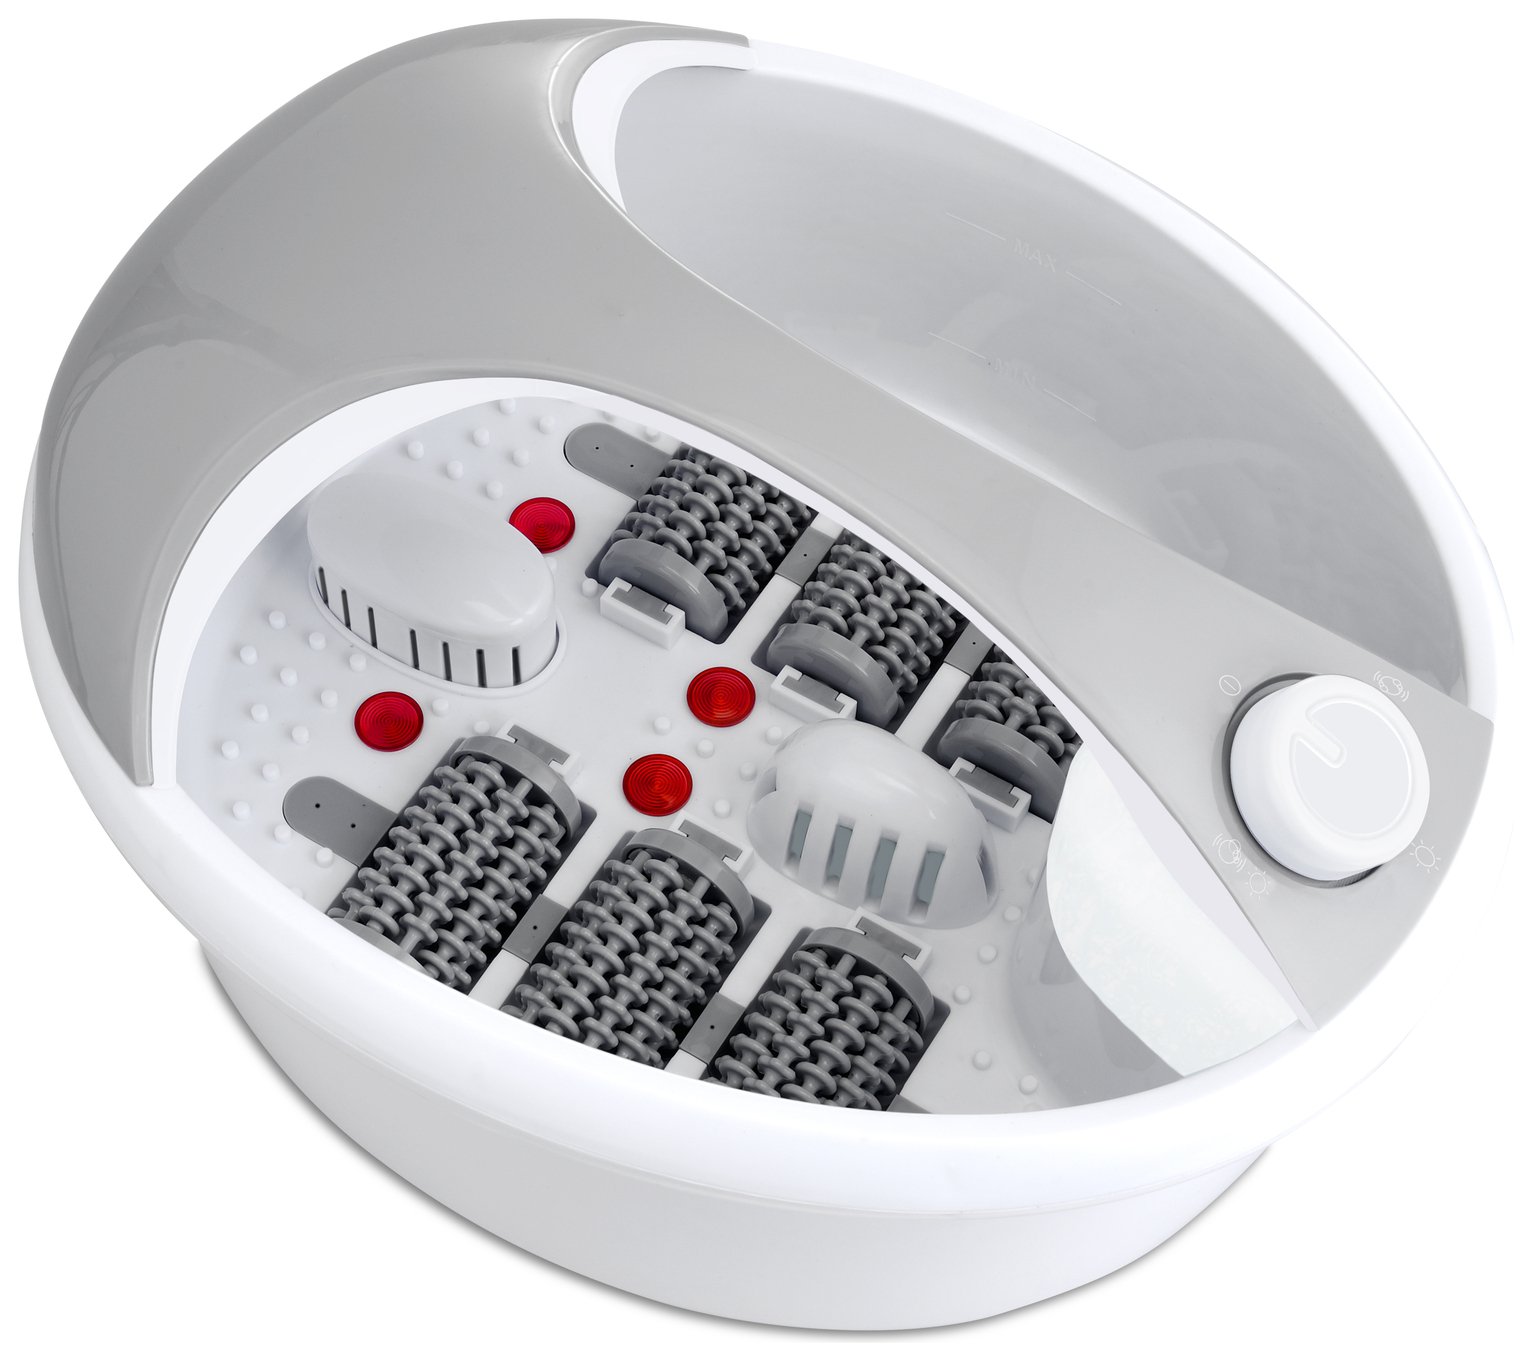 Rio Deluxe Footspa and Massager